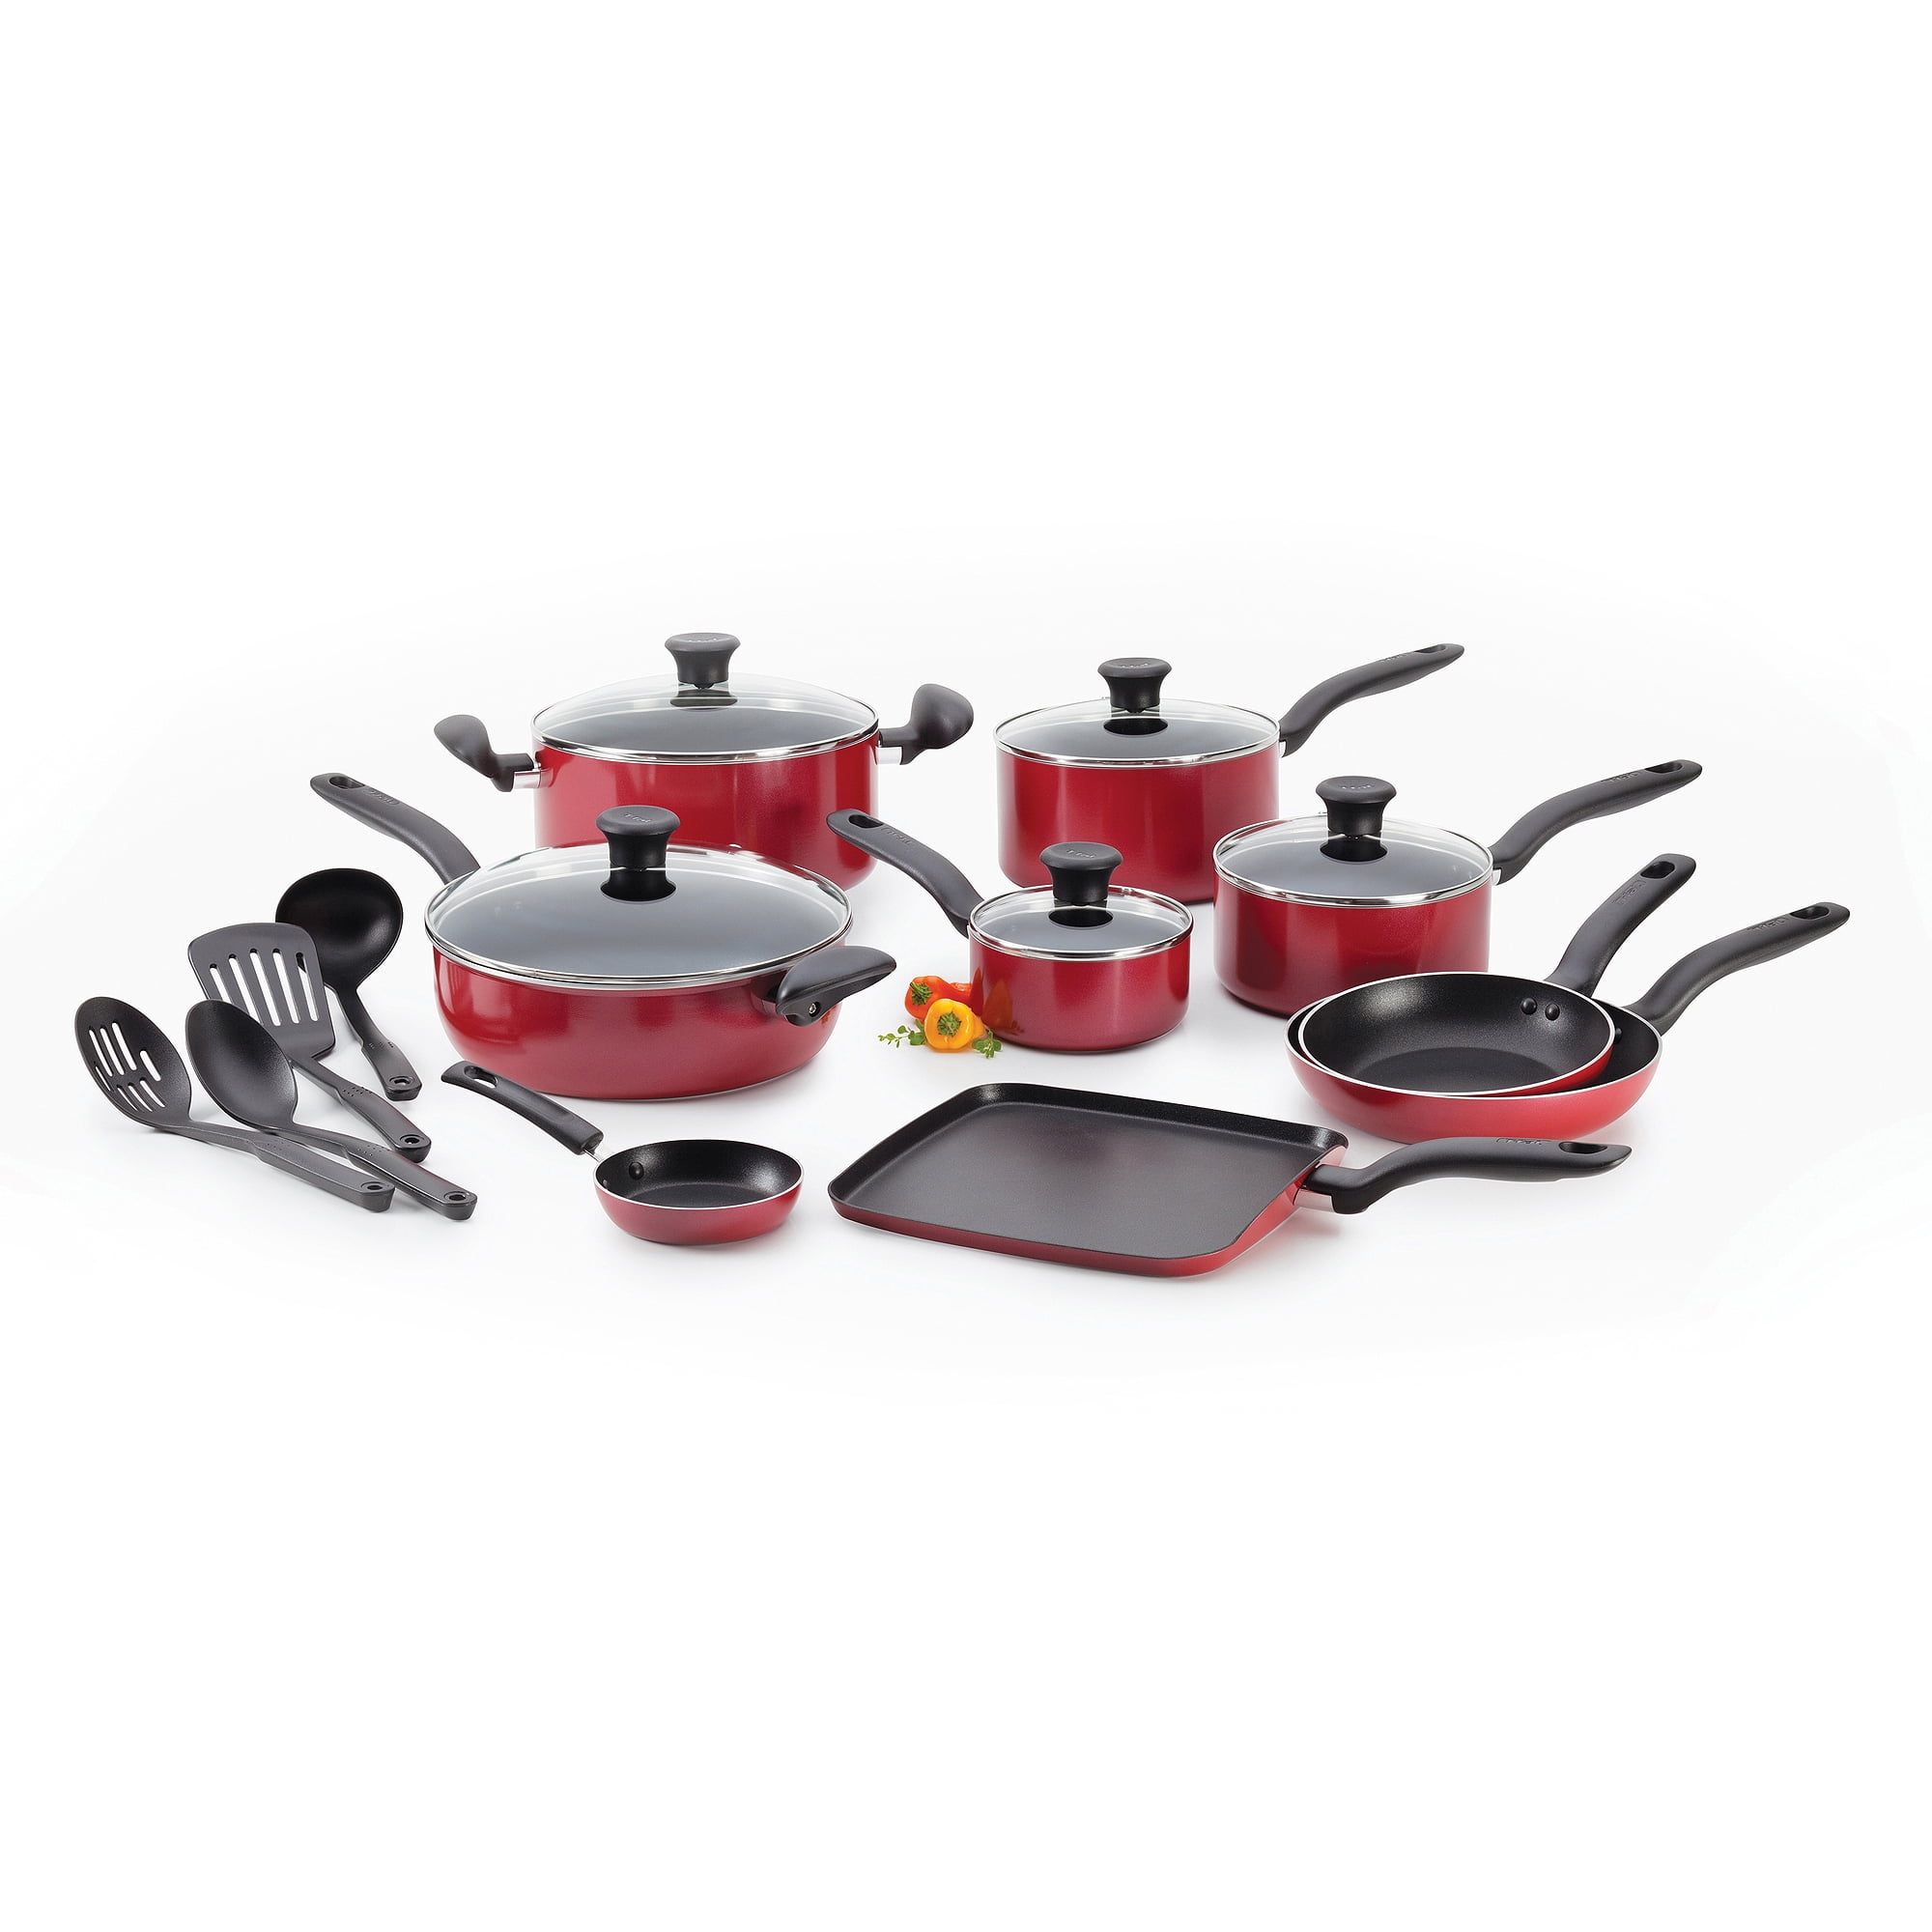 T-FAL T-fal Easy Care 12-Piece Non-Stick Cookware Set, Red B089SC64